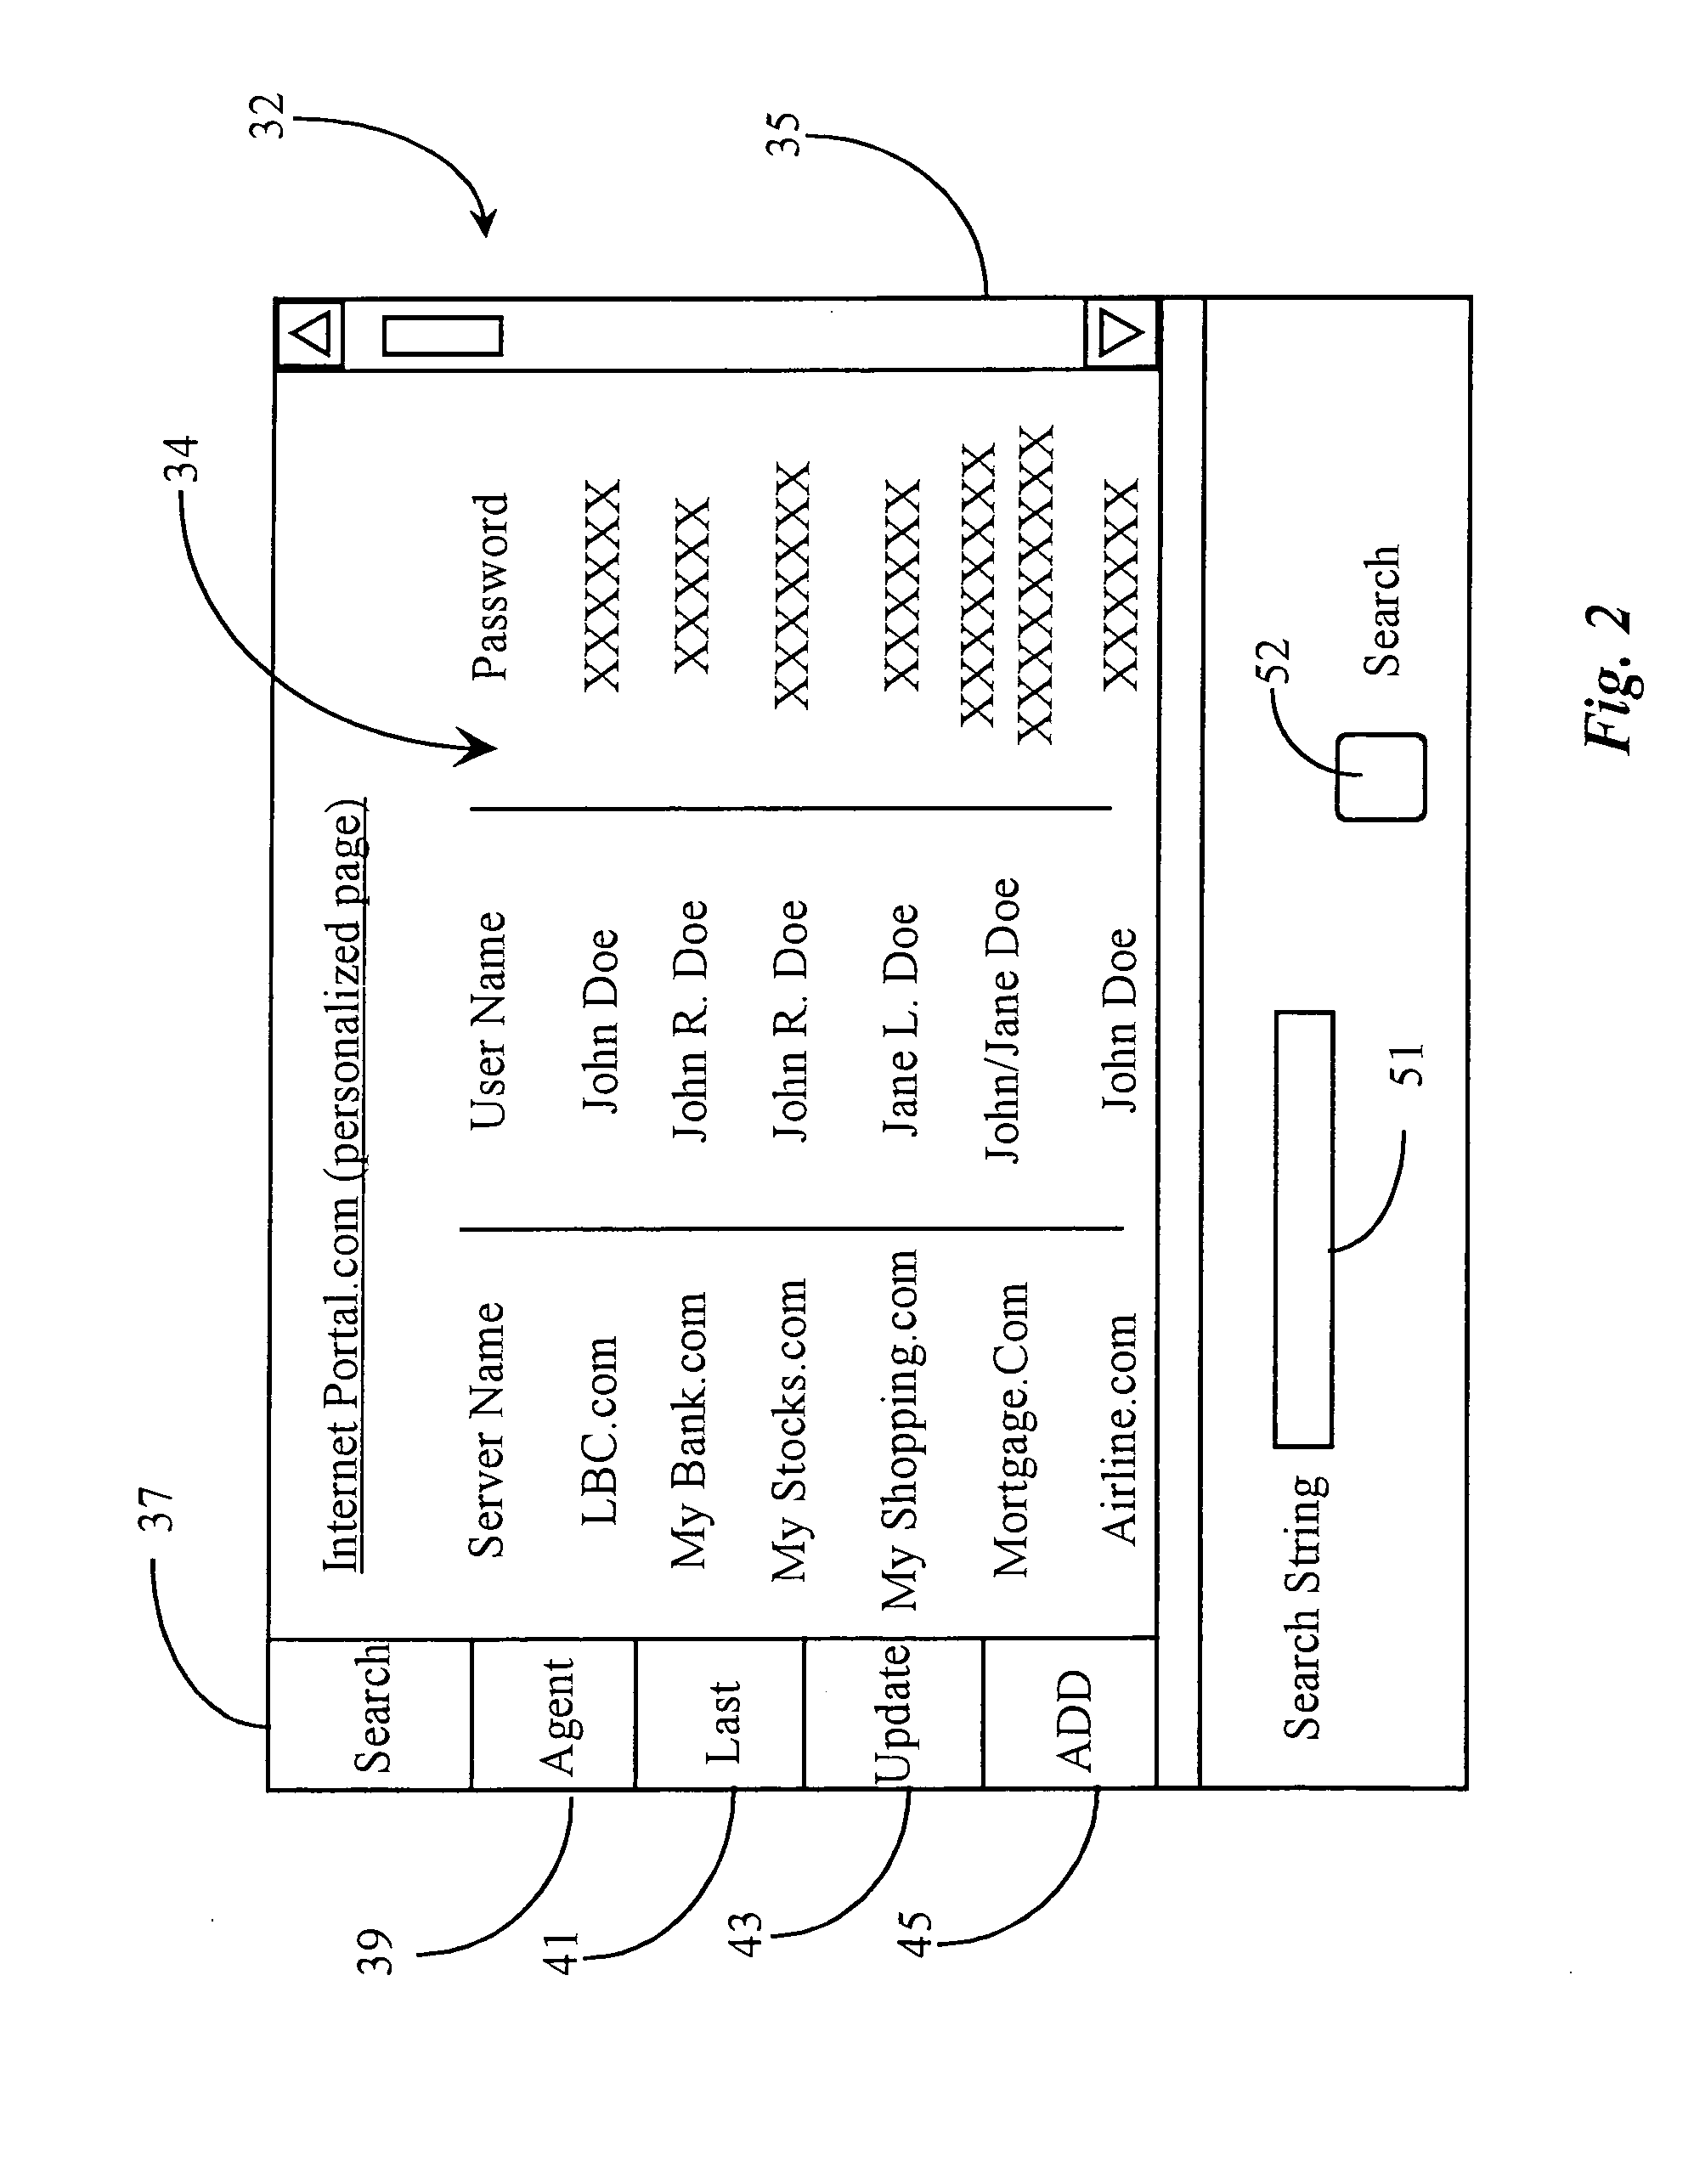 Method and apparatus for tracking functional states of a Web-site and reporting results to Web developers